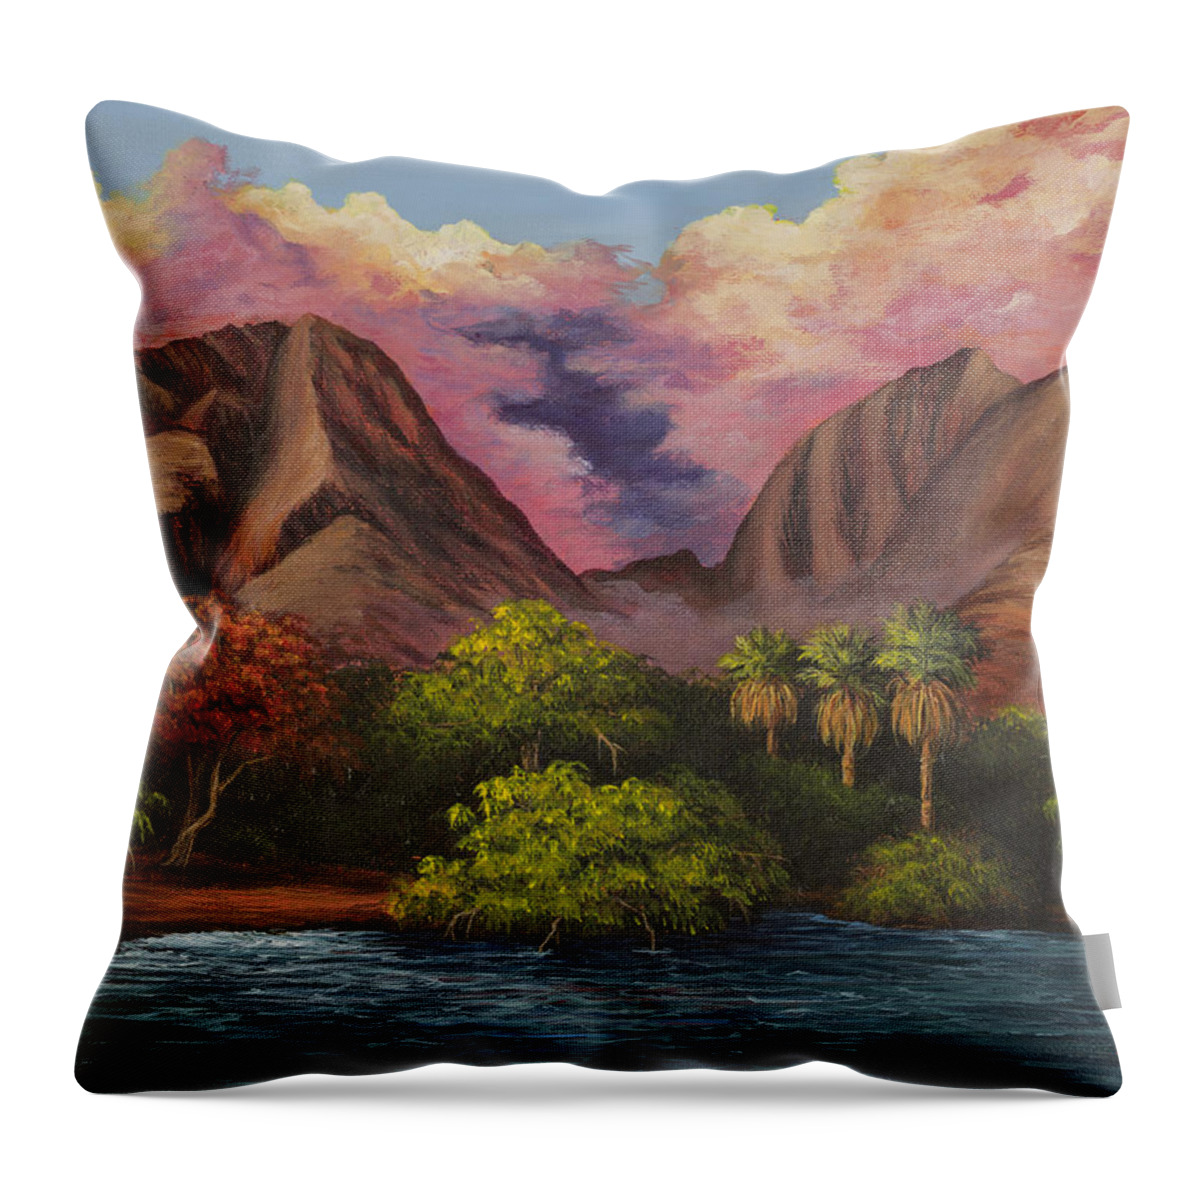 Landscape Throw Pillow featuring the painting Olowalu Valley by Darice Machel McGuire